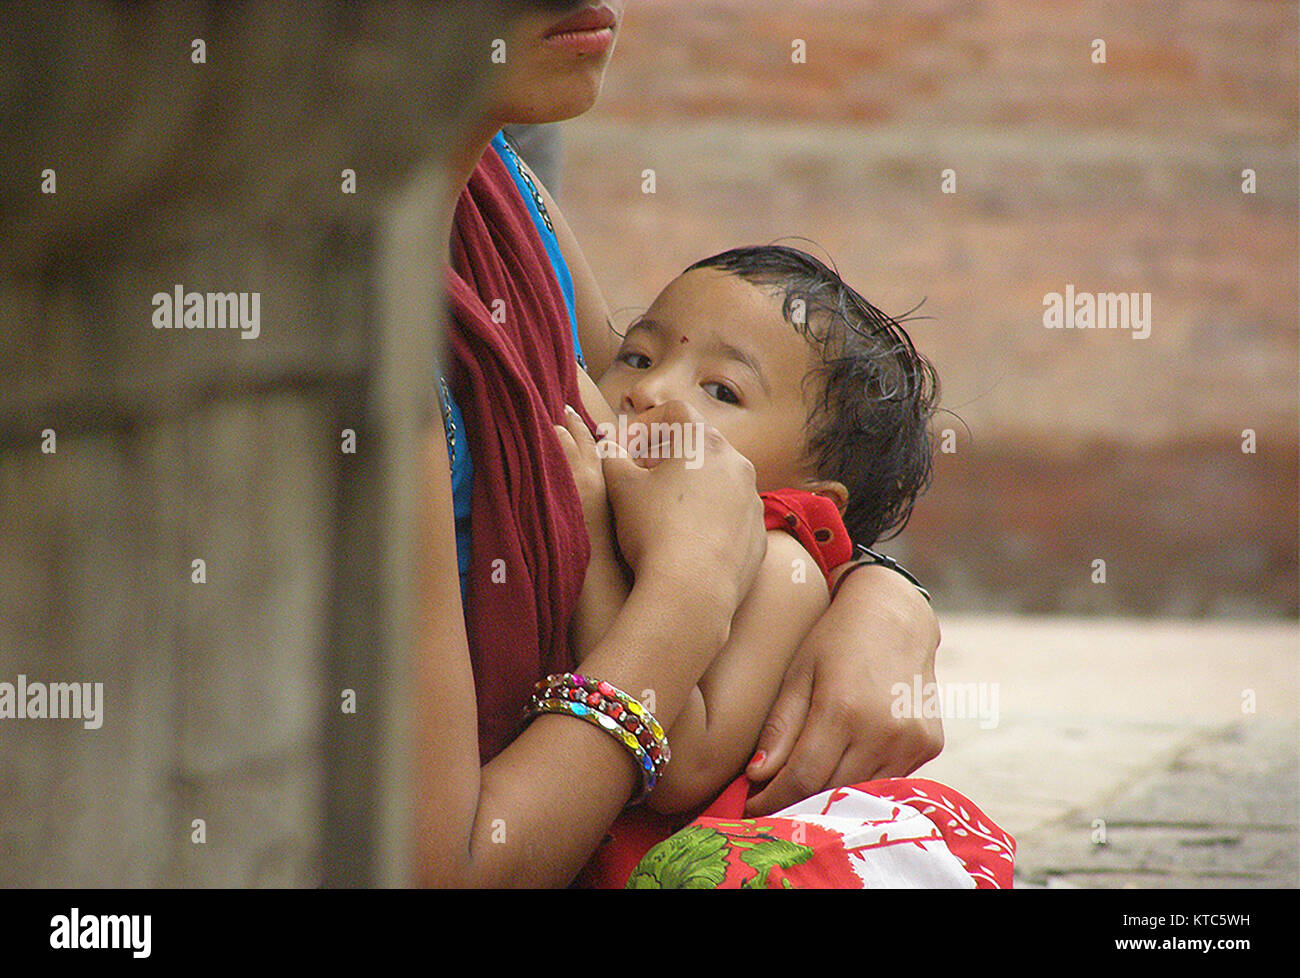 Nepal has made remarkable strides in improving the maternal health. A woman breastfeeding her child at the Basantapur Durbar square Kathmandu, Nepal. Stock Photo